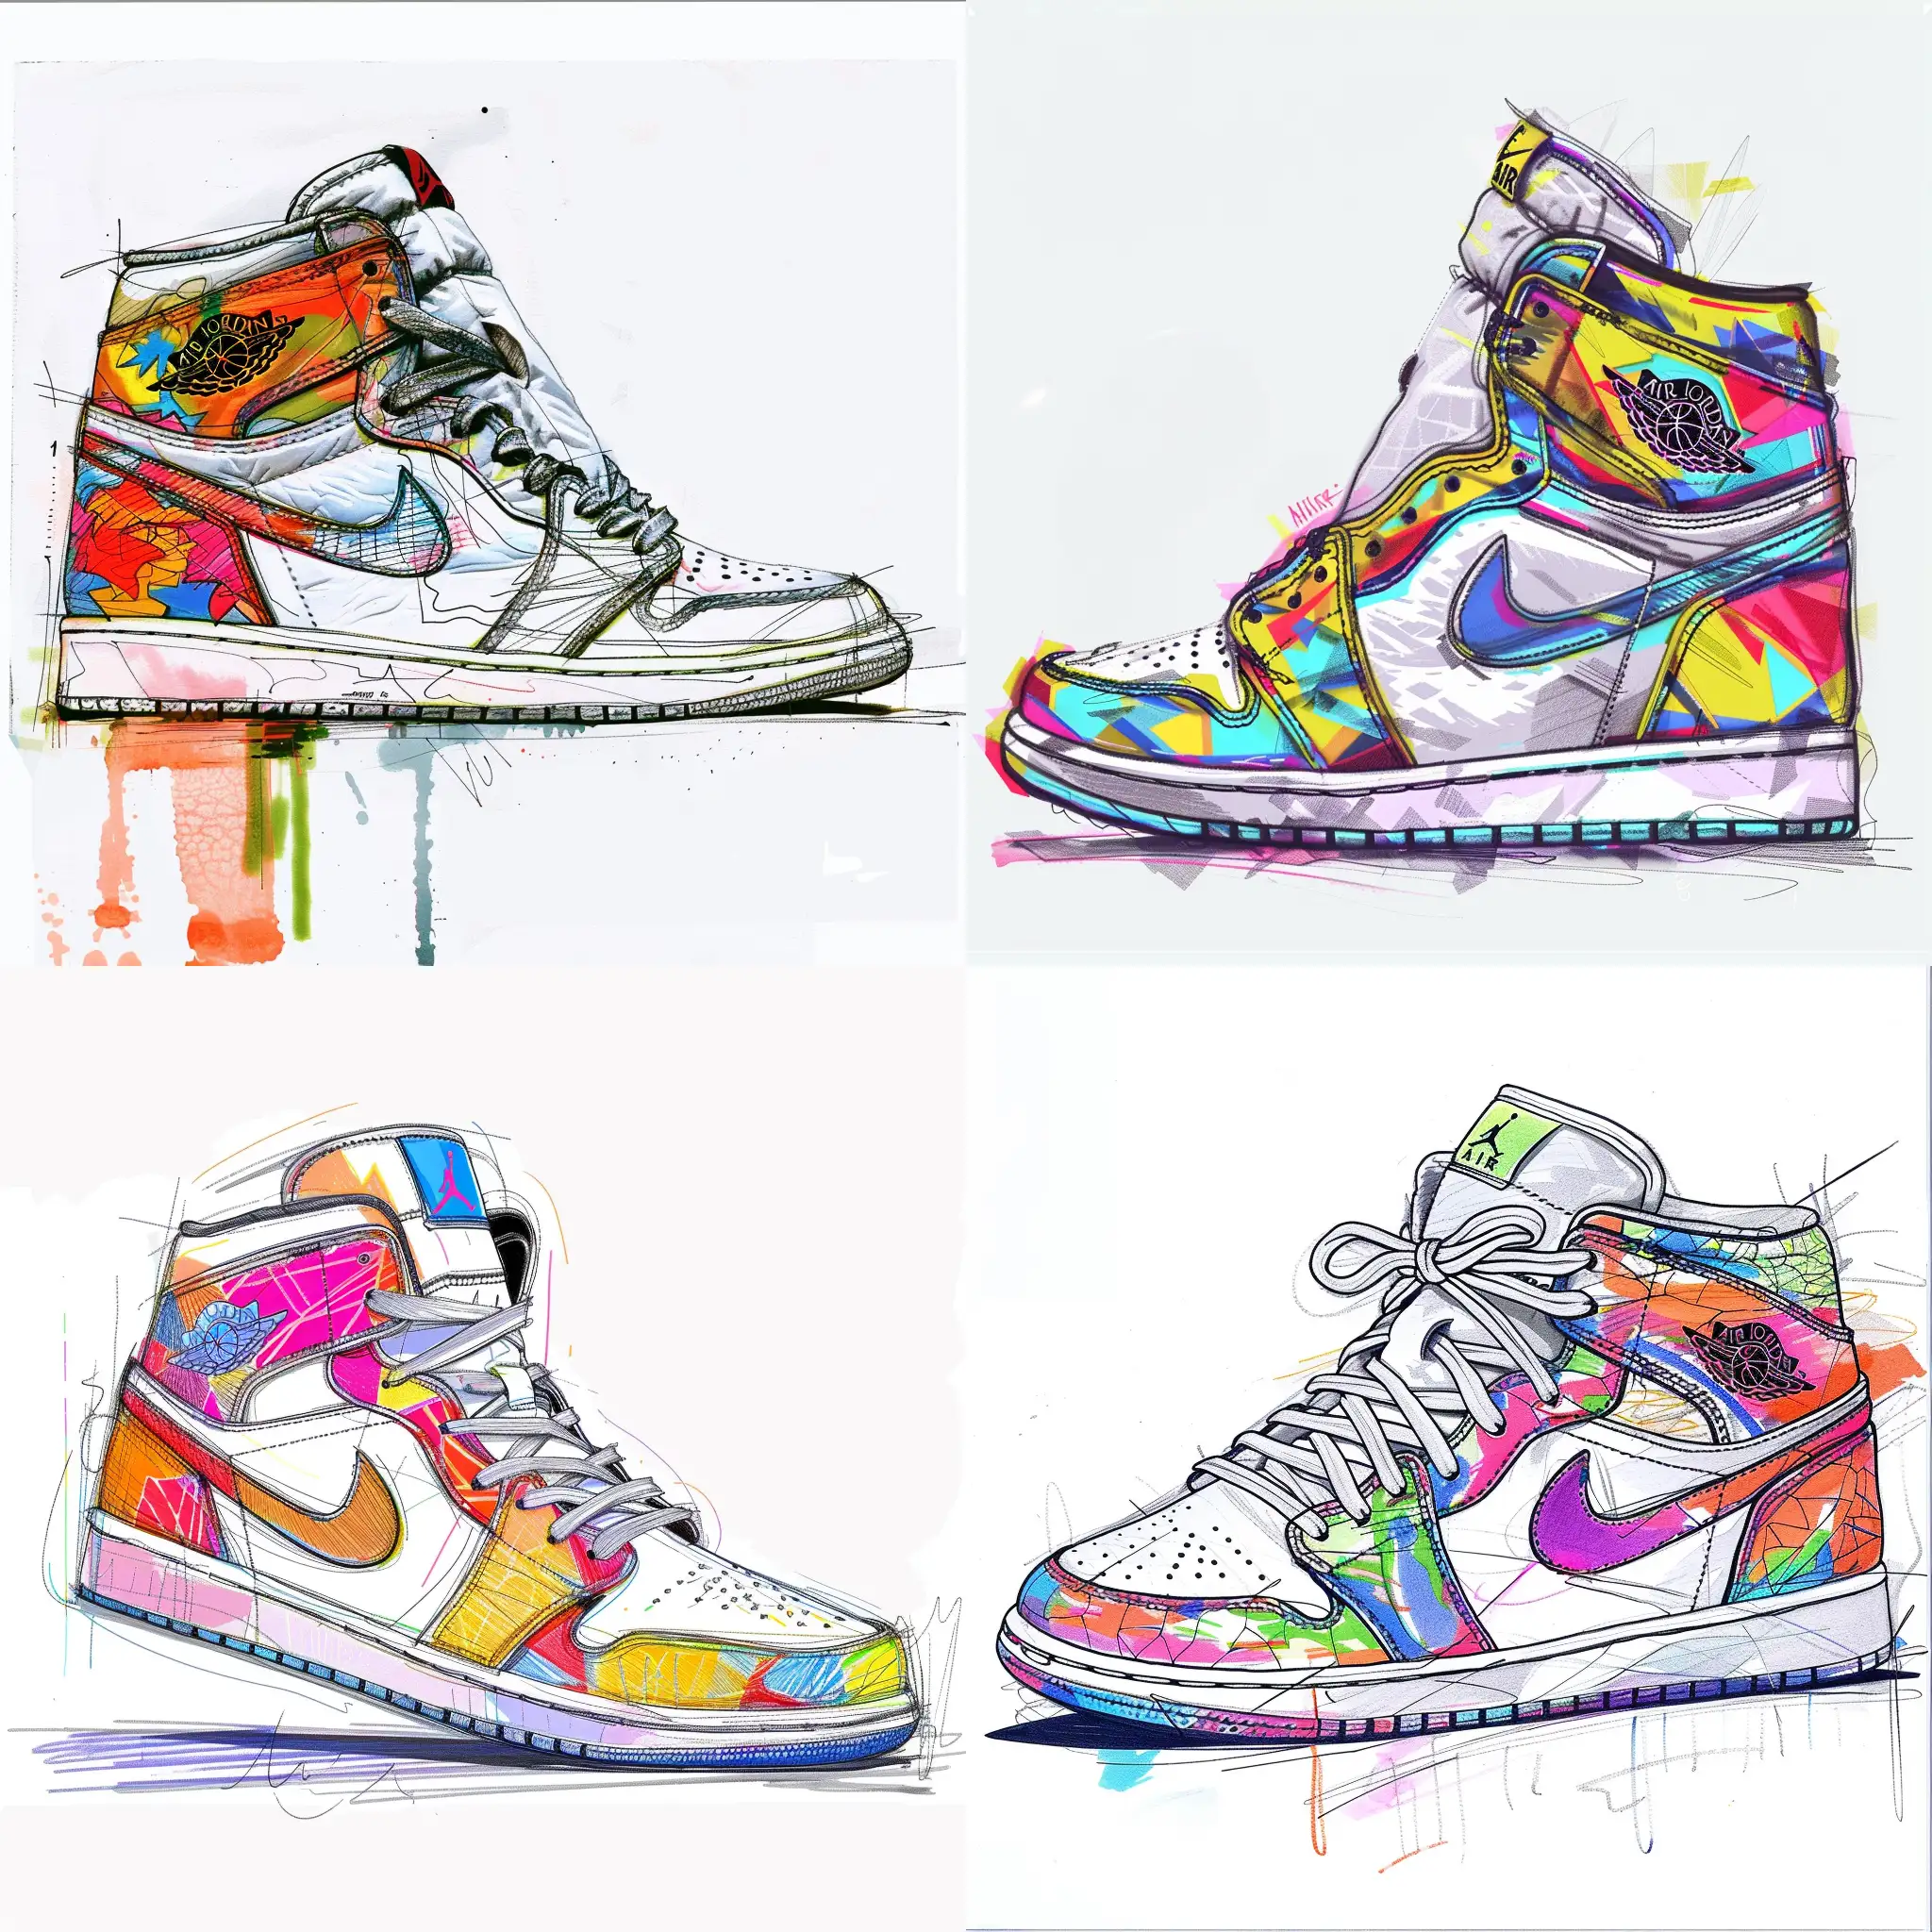 Abstract-Sneaker-Jordan-1-with-23-Flowers-Limited-Color-Palette-Vivid-Line-Sketch